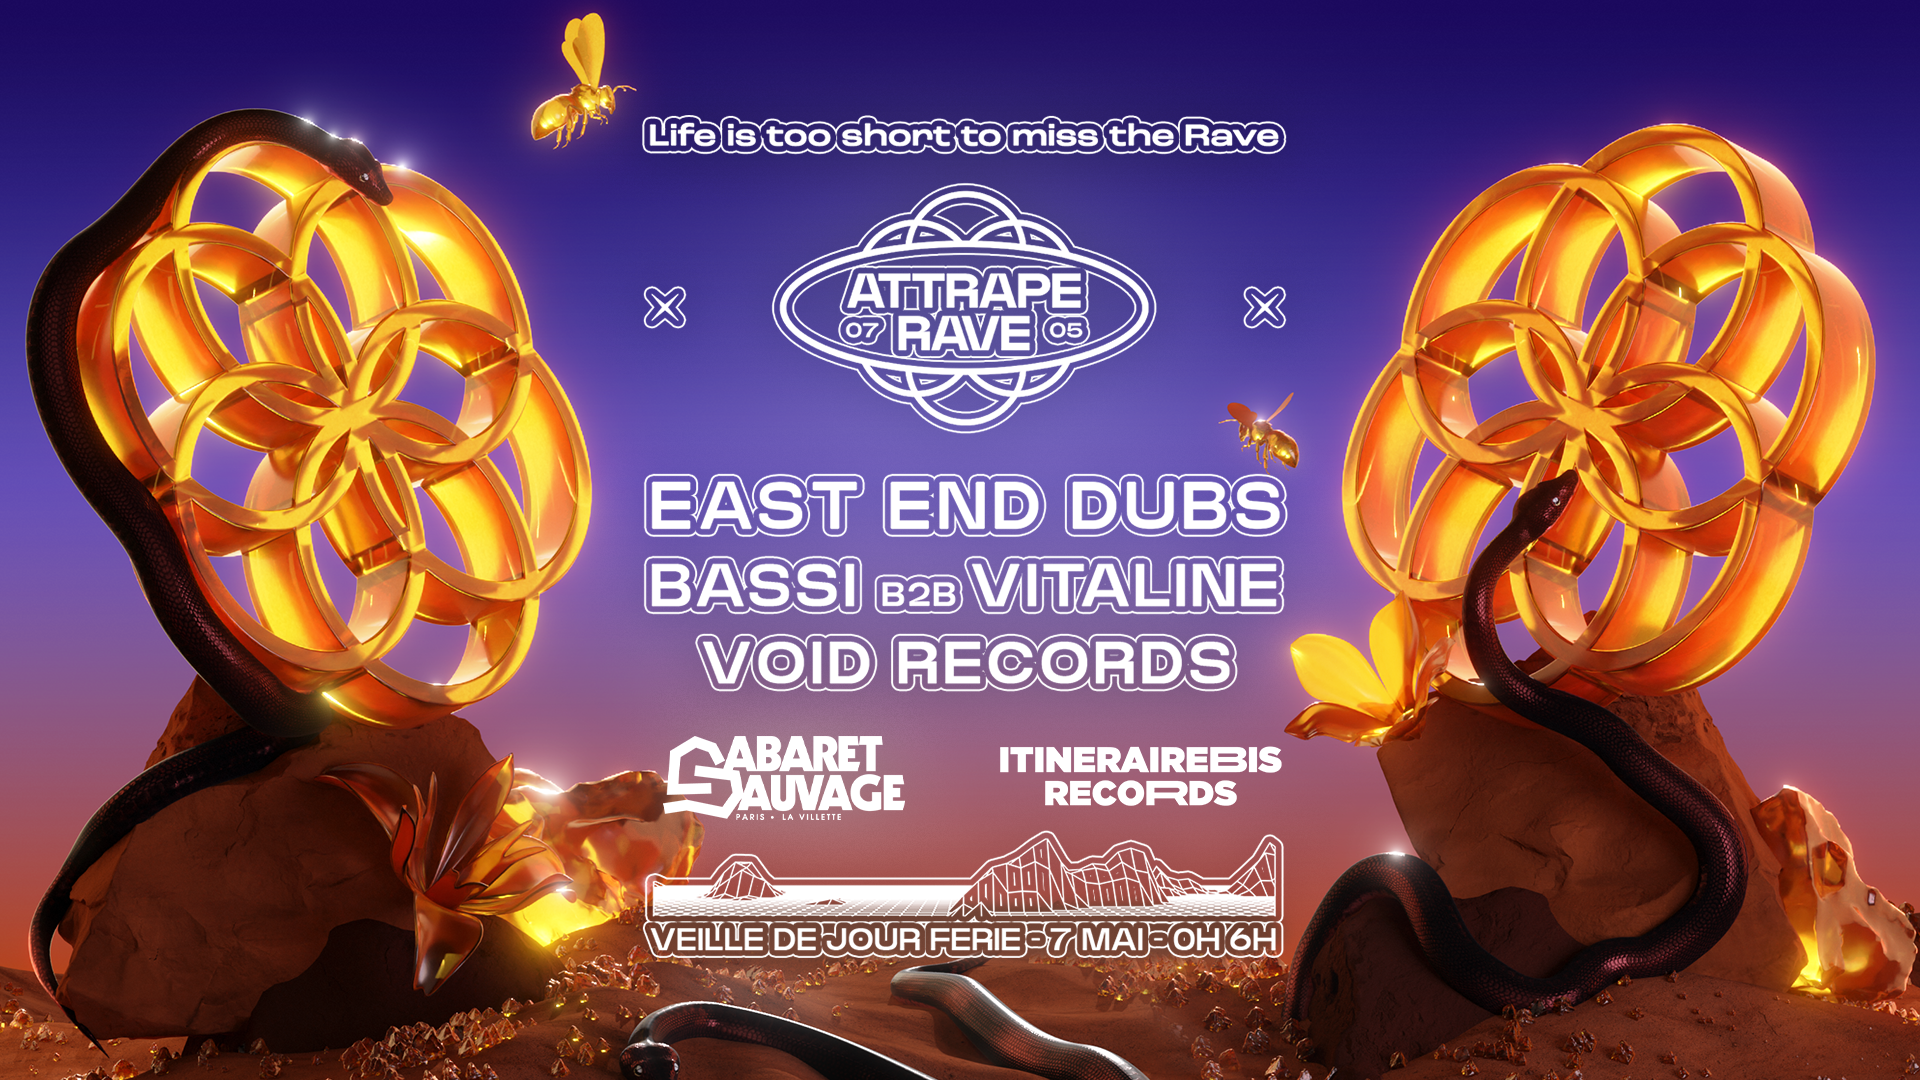 ATTRAPE RAVE SAUVAGE I East End Dubs, Vitaline, BASSI, VOID RECORDS - フライヤー表